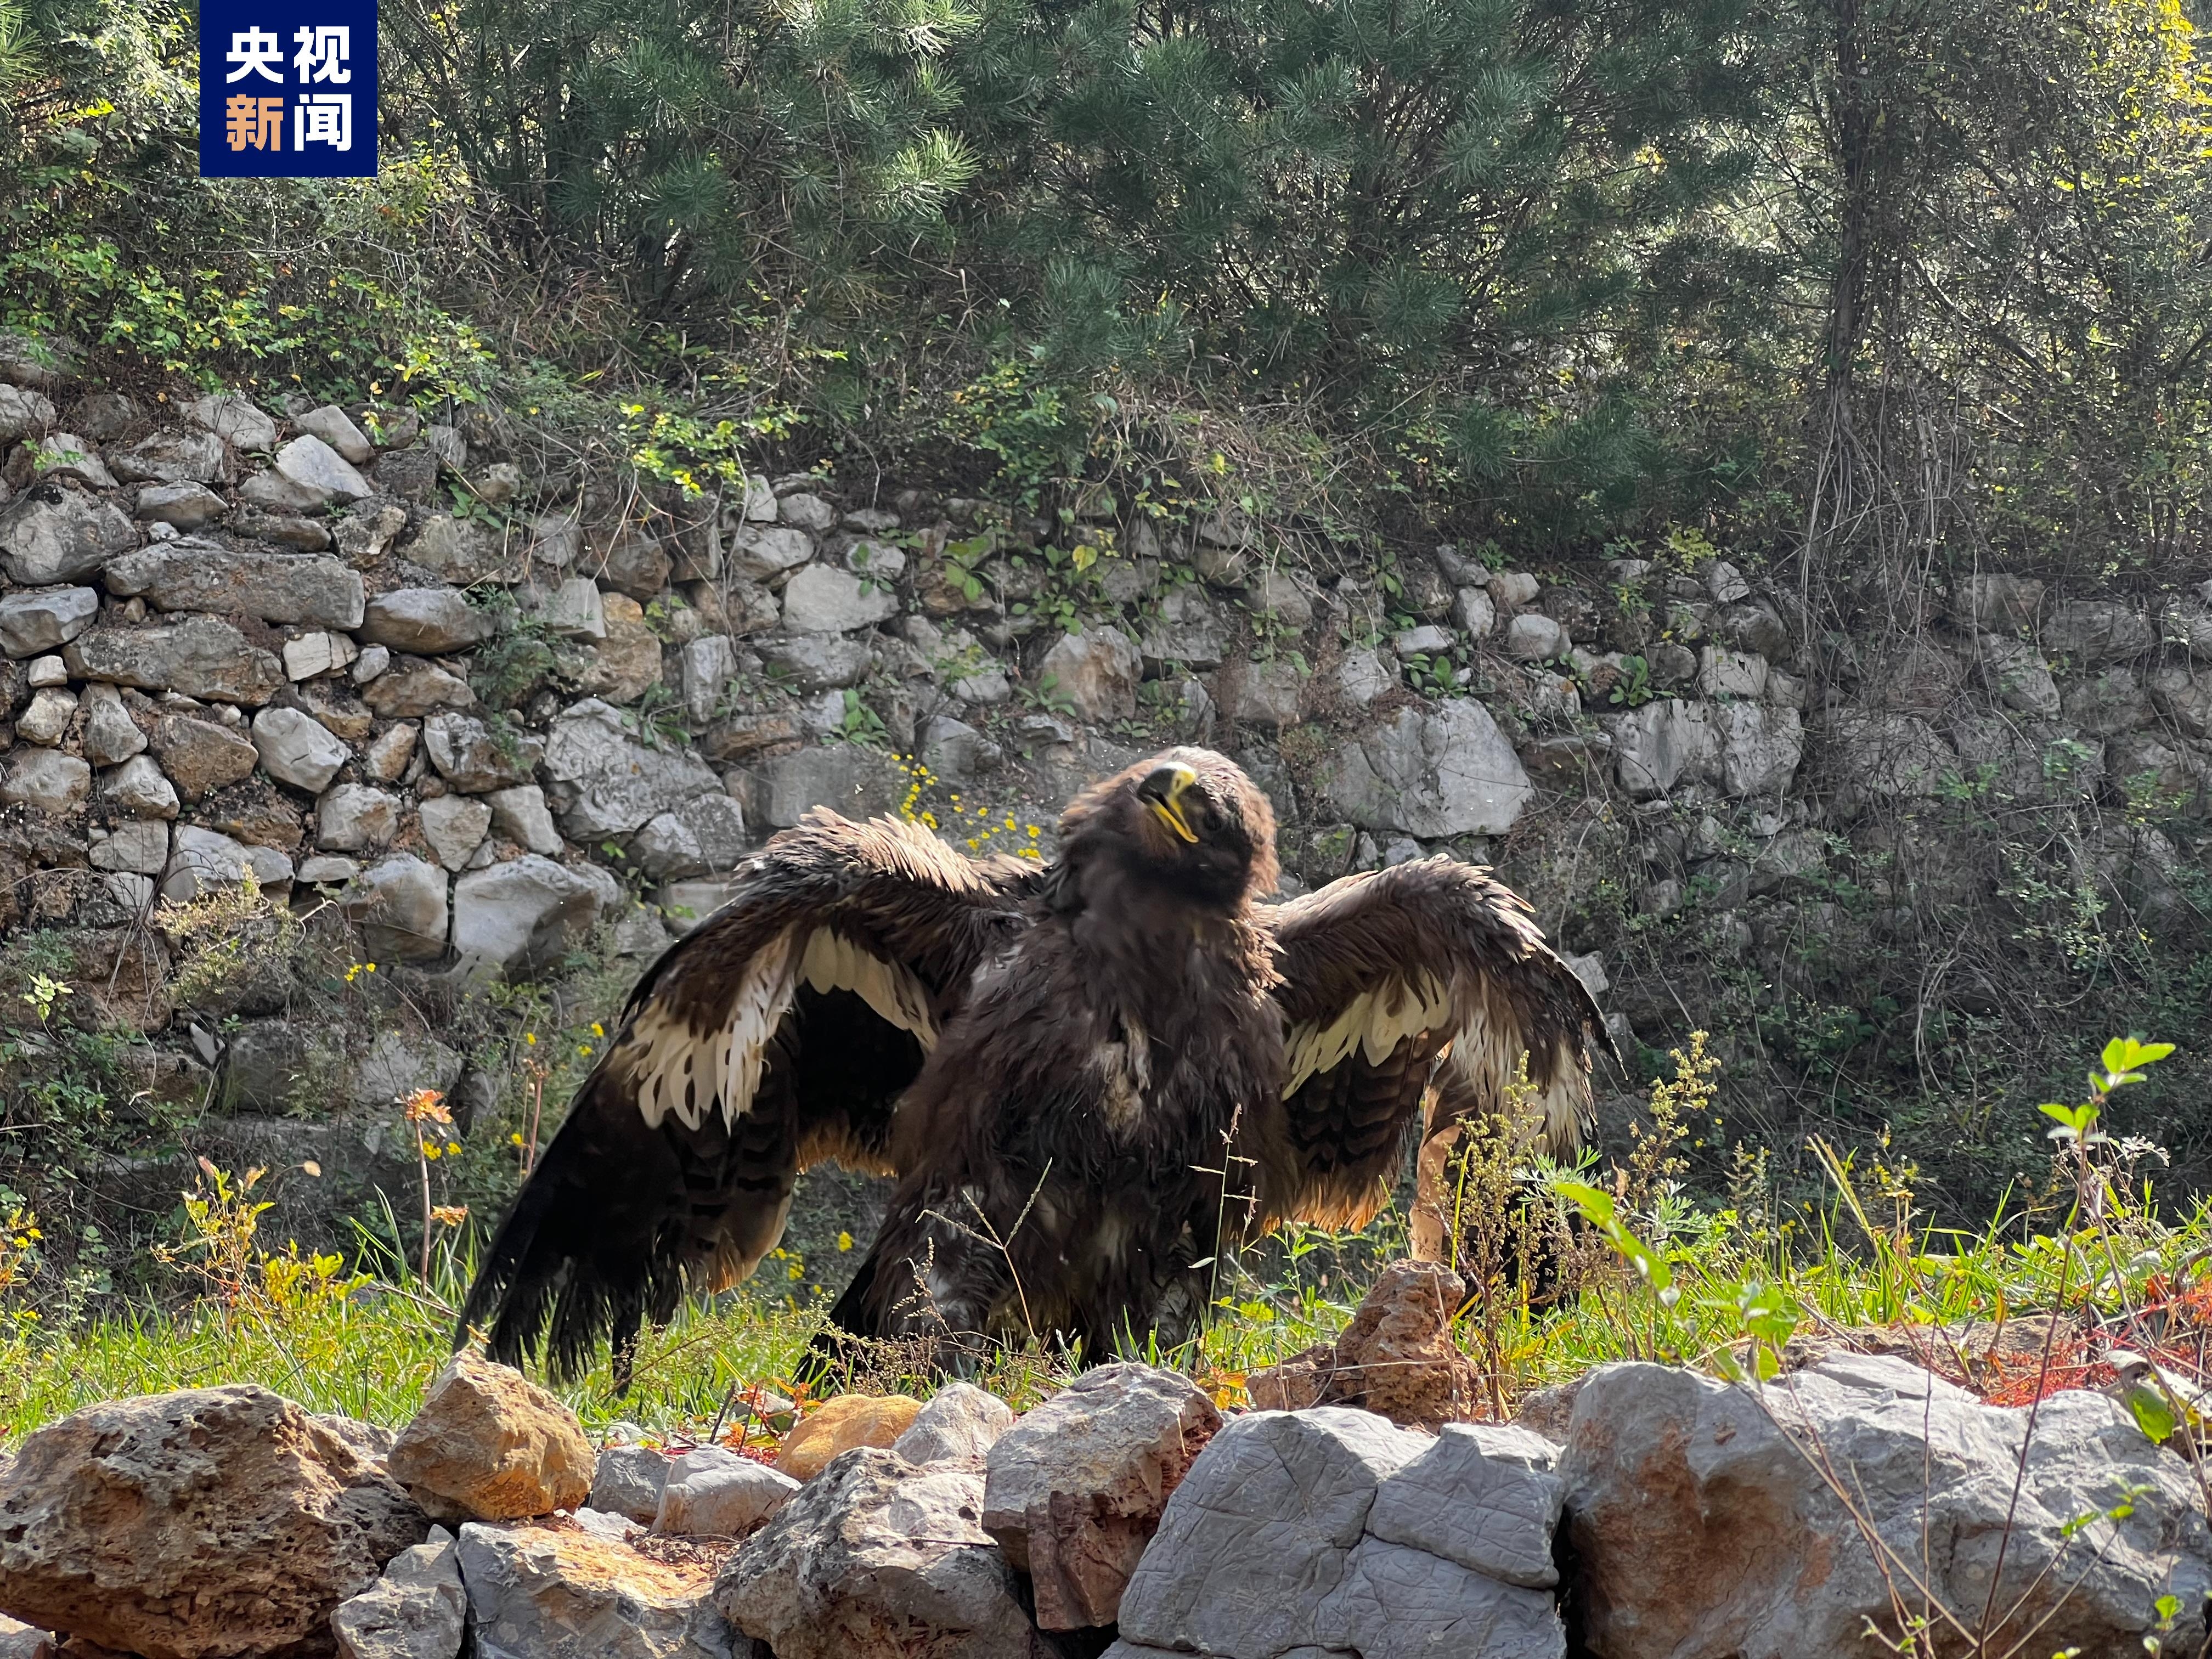 67 rescued rare wild animals are released to nature in Linlv Mountain, Hongqi Canal, Anyang